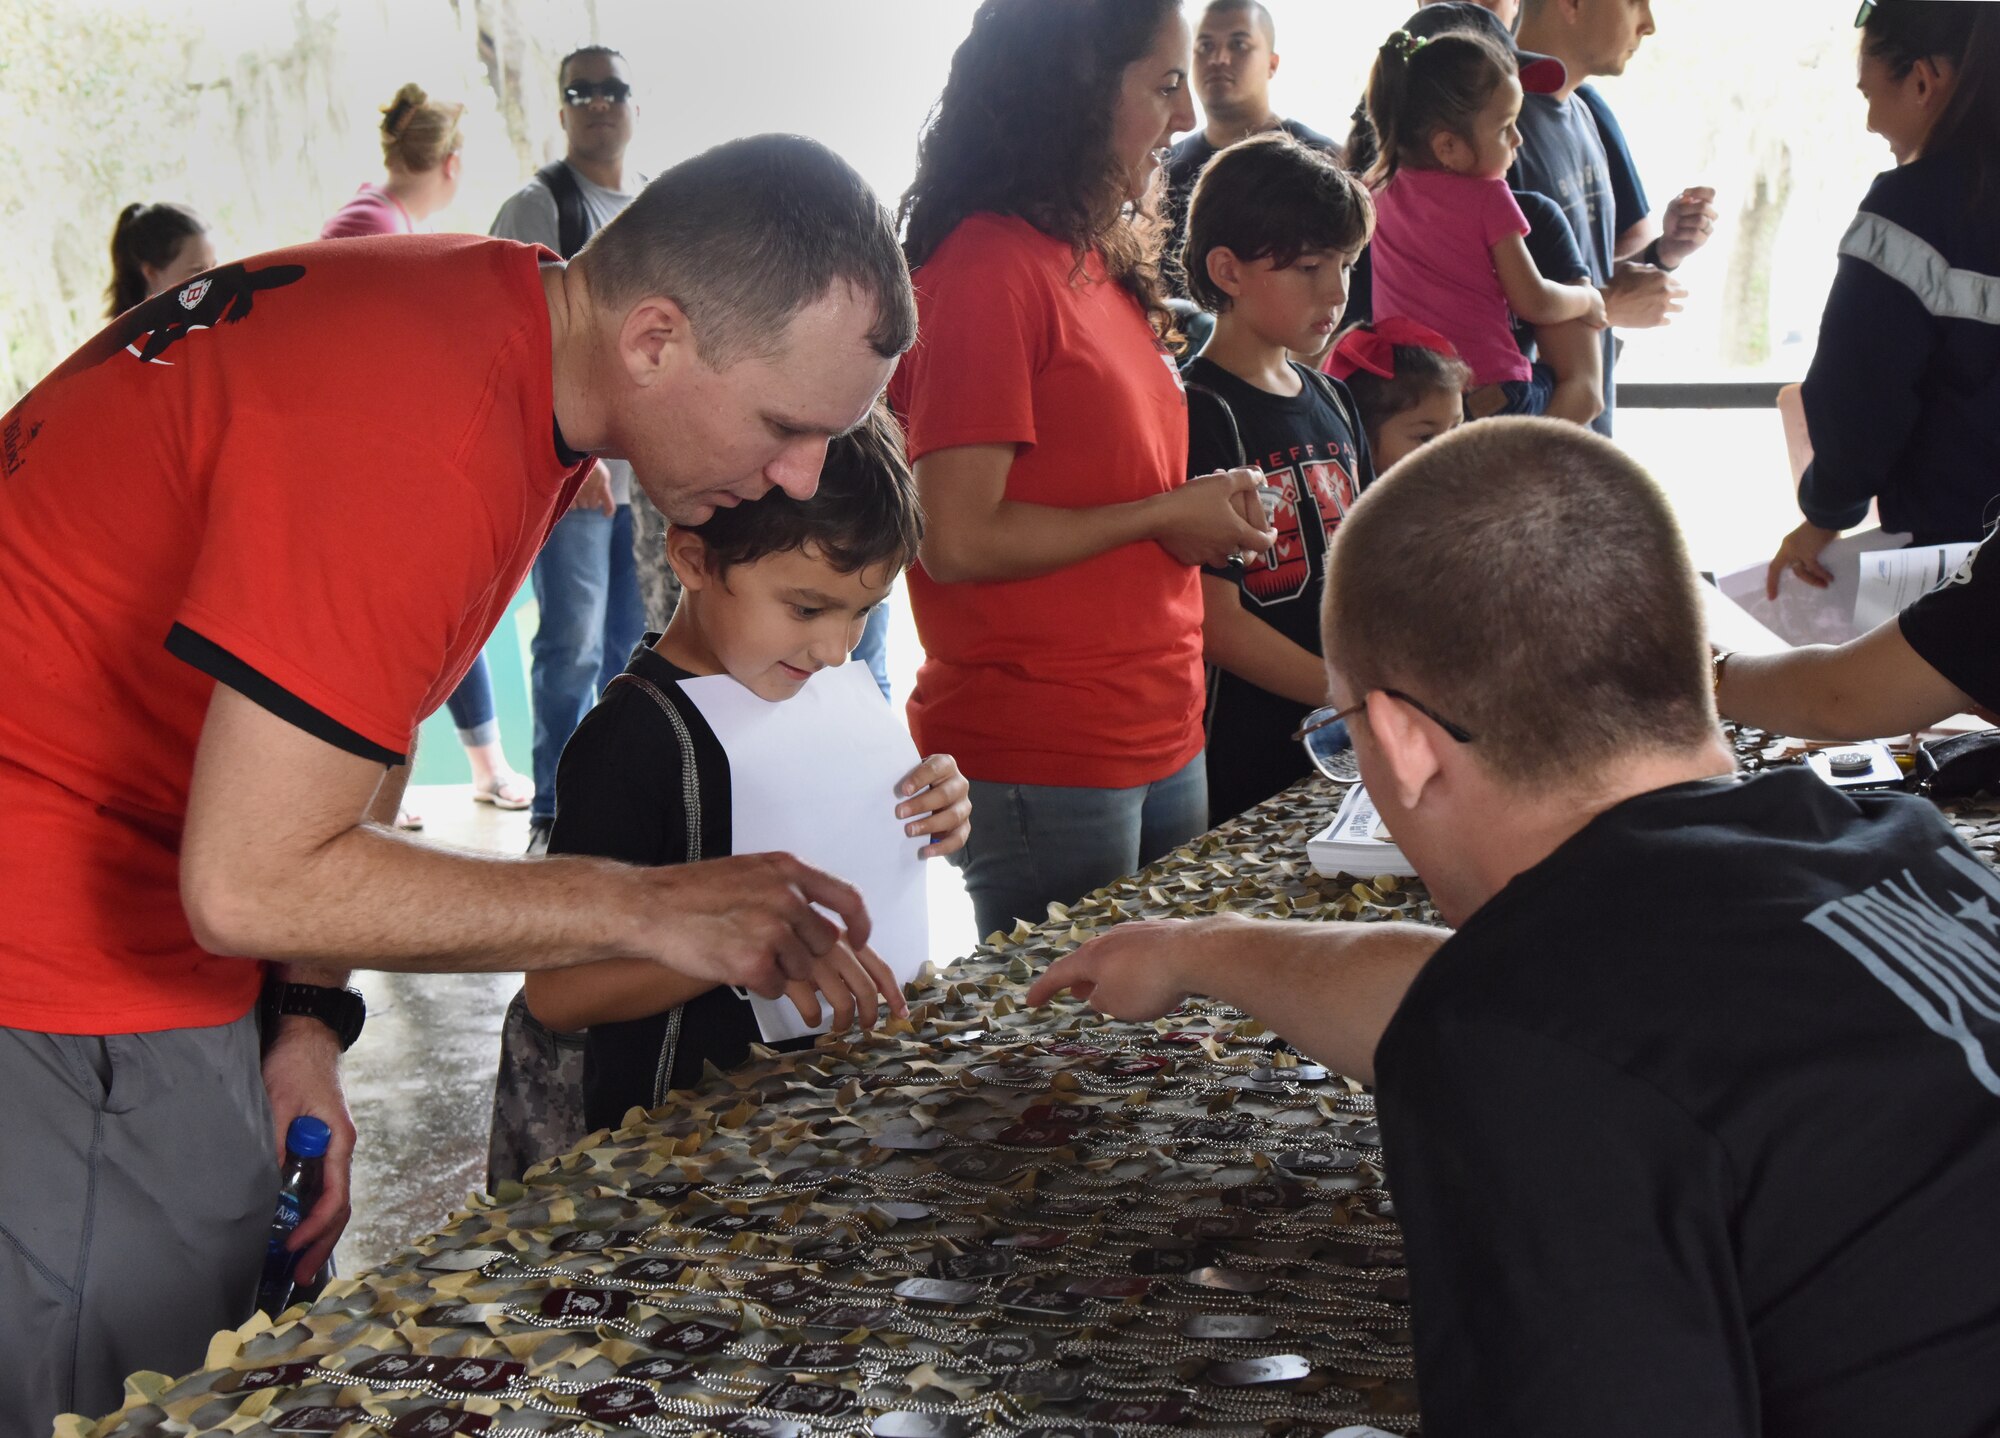 U.S. Air Force Capt. Michael Blank, 81st Medical Operations Squadron nurse, helps his son, Carson, choose an event dog tag during Operation Hero at Keesler Air Force Base, Mississippi, April 6, 2019. The event, hosted by the Airman and Family Readiness Center in recognition of the Month of the Military Child, gave military children a glimpse into the lives of deployed military members. Children received Operation Hero dog tags and t-shirts as they made their way through the mock deployment line as well as the opportunity to experience medical triage demonstrations, gas mask training and have their faces painted. (U.S. Air Force photo by Kemberly Groue)